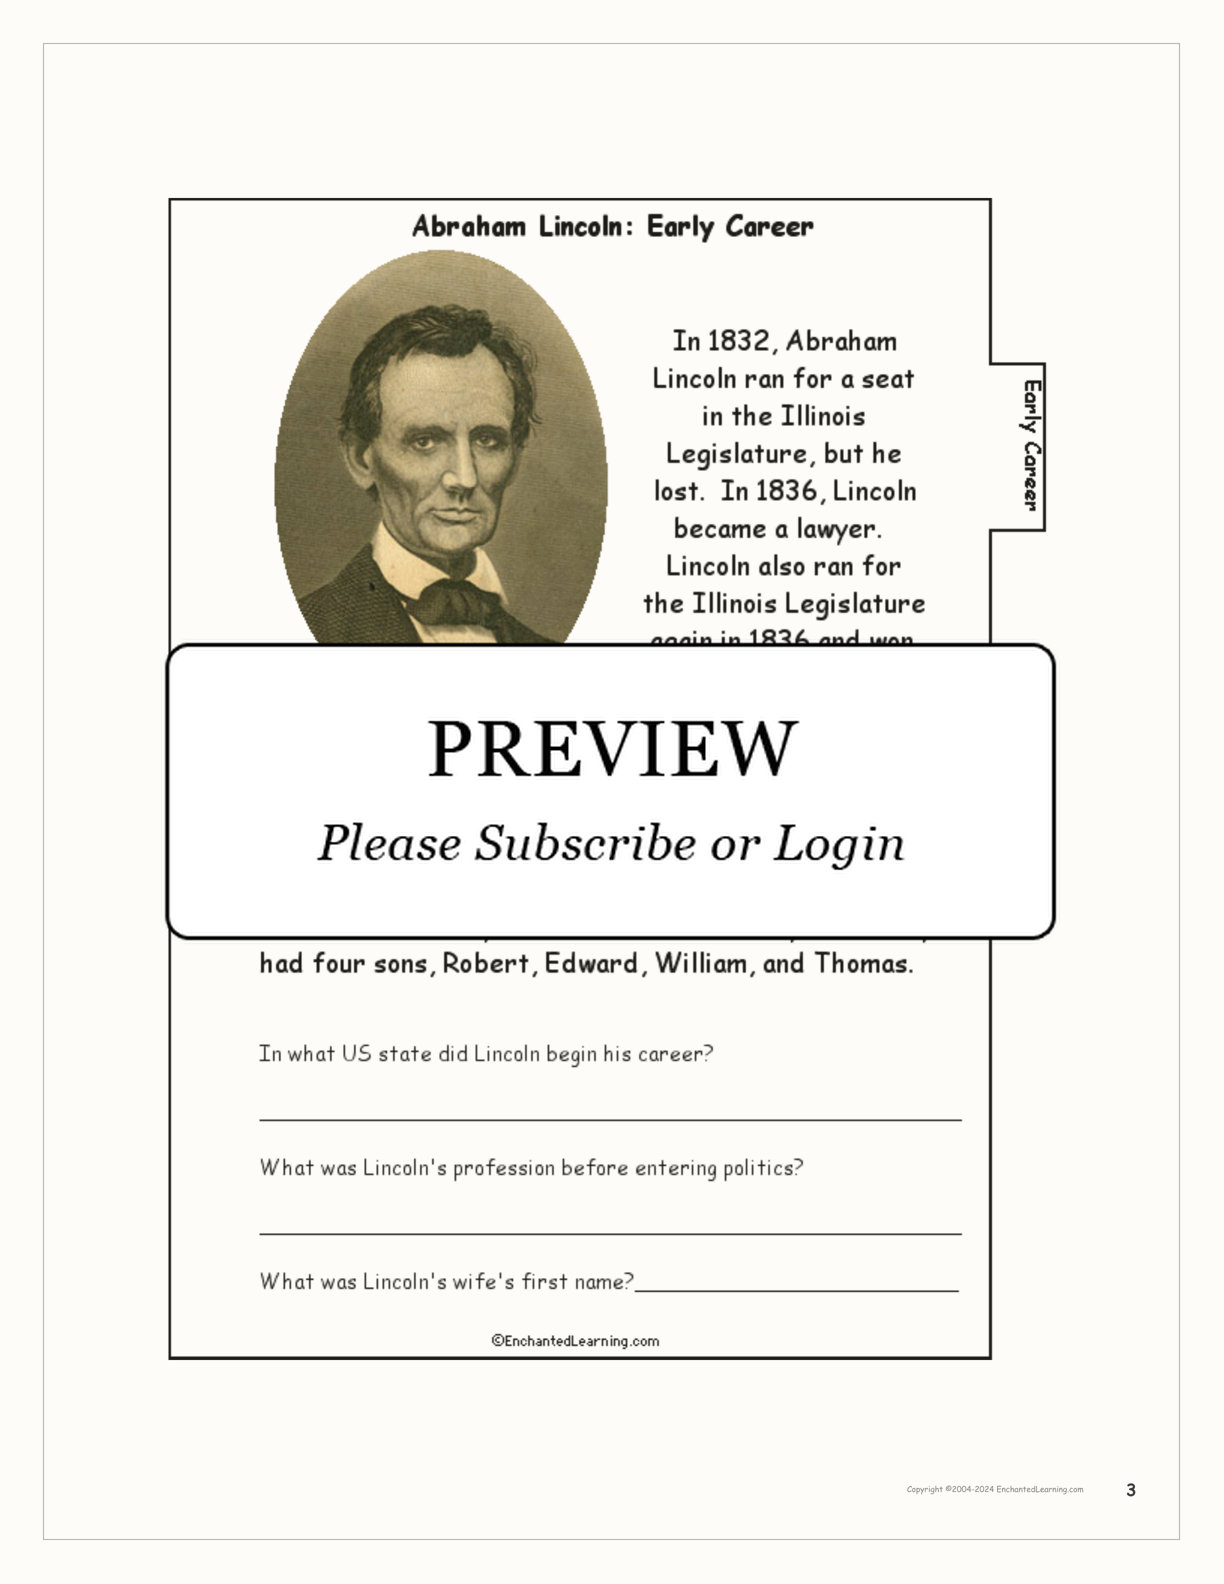 Abraham Lincoln Book interactive printout page 3